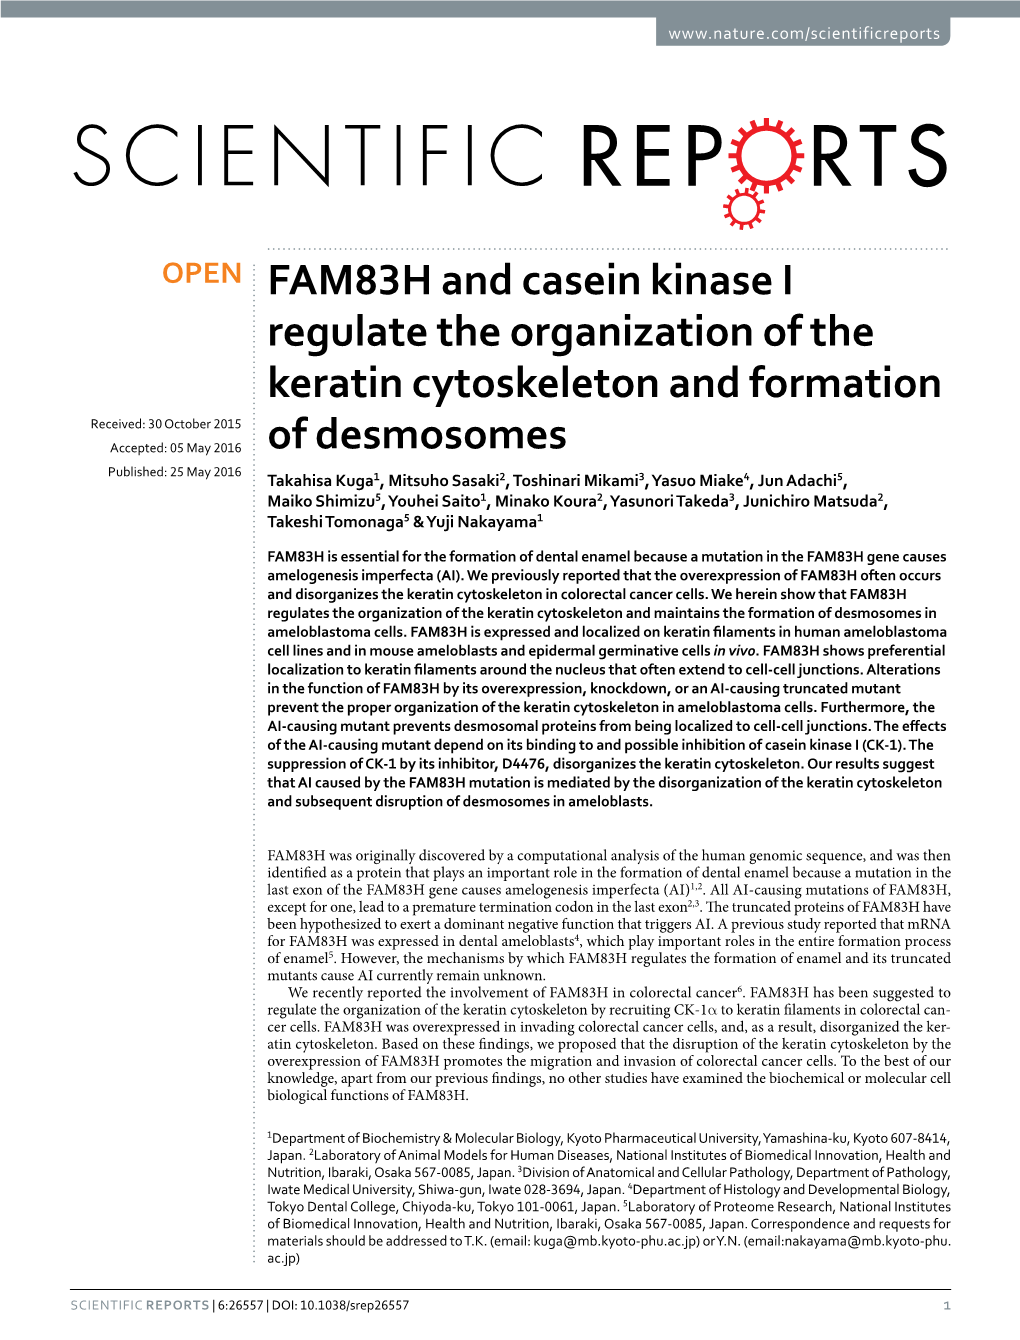 FAM83H and Casein Kinase I Regulate the Organization of the Keratin